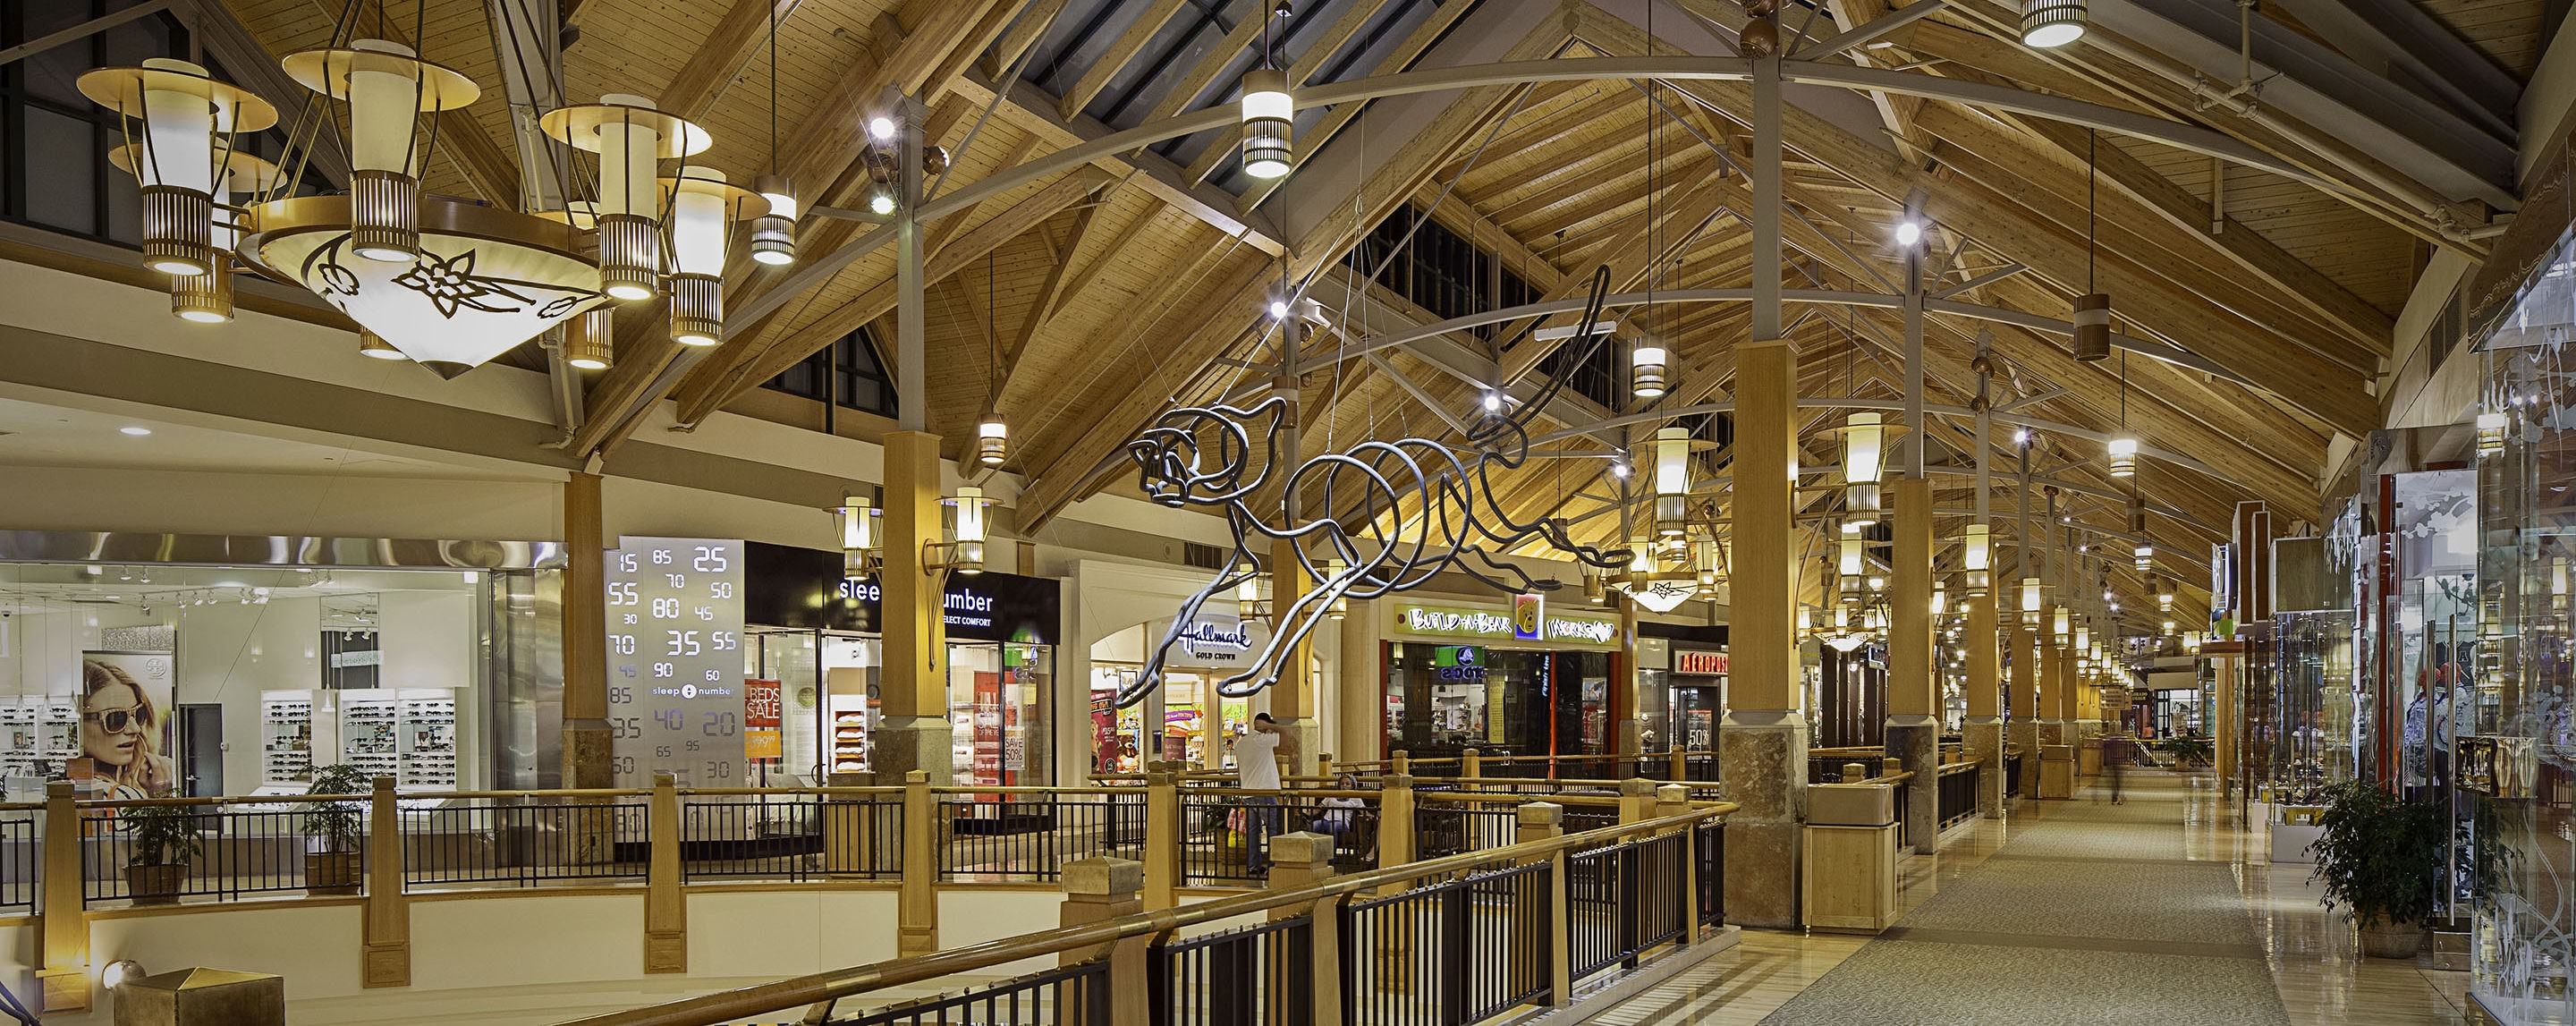 Park Meadows, 8401 Park Meadows Center Dr, Lone Tree, CO, Shopping Centers  & Malls - MapQuest